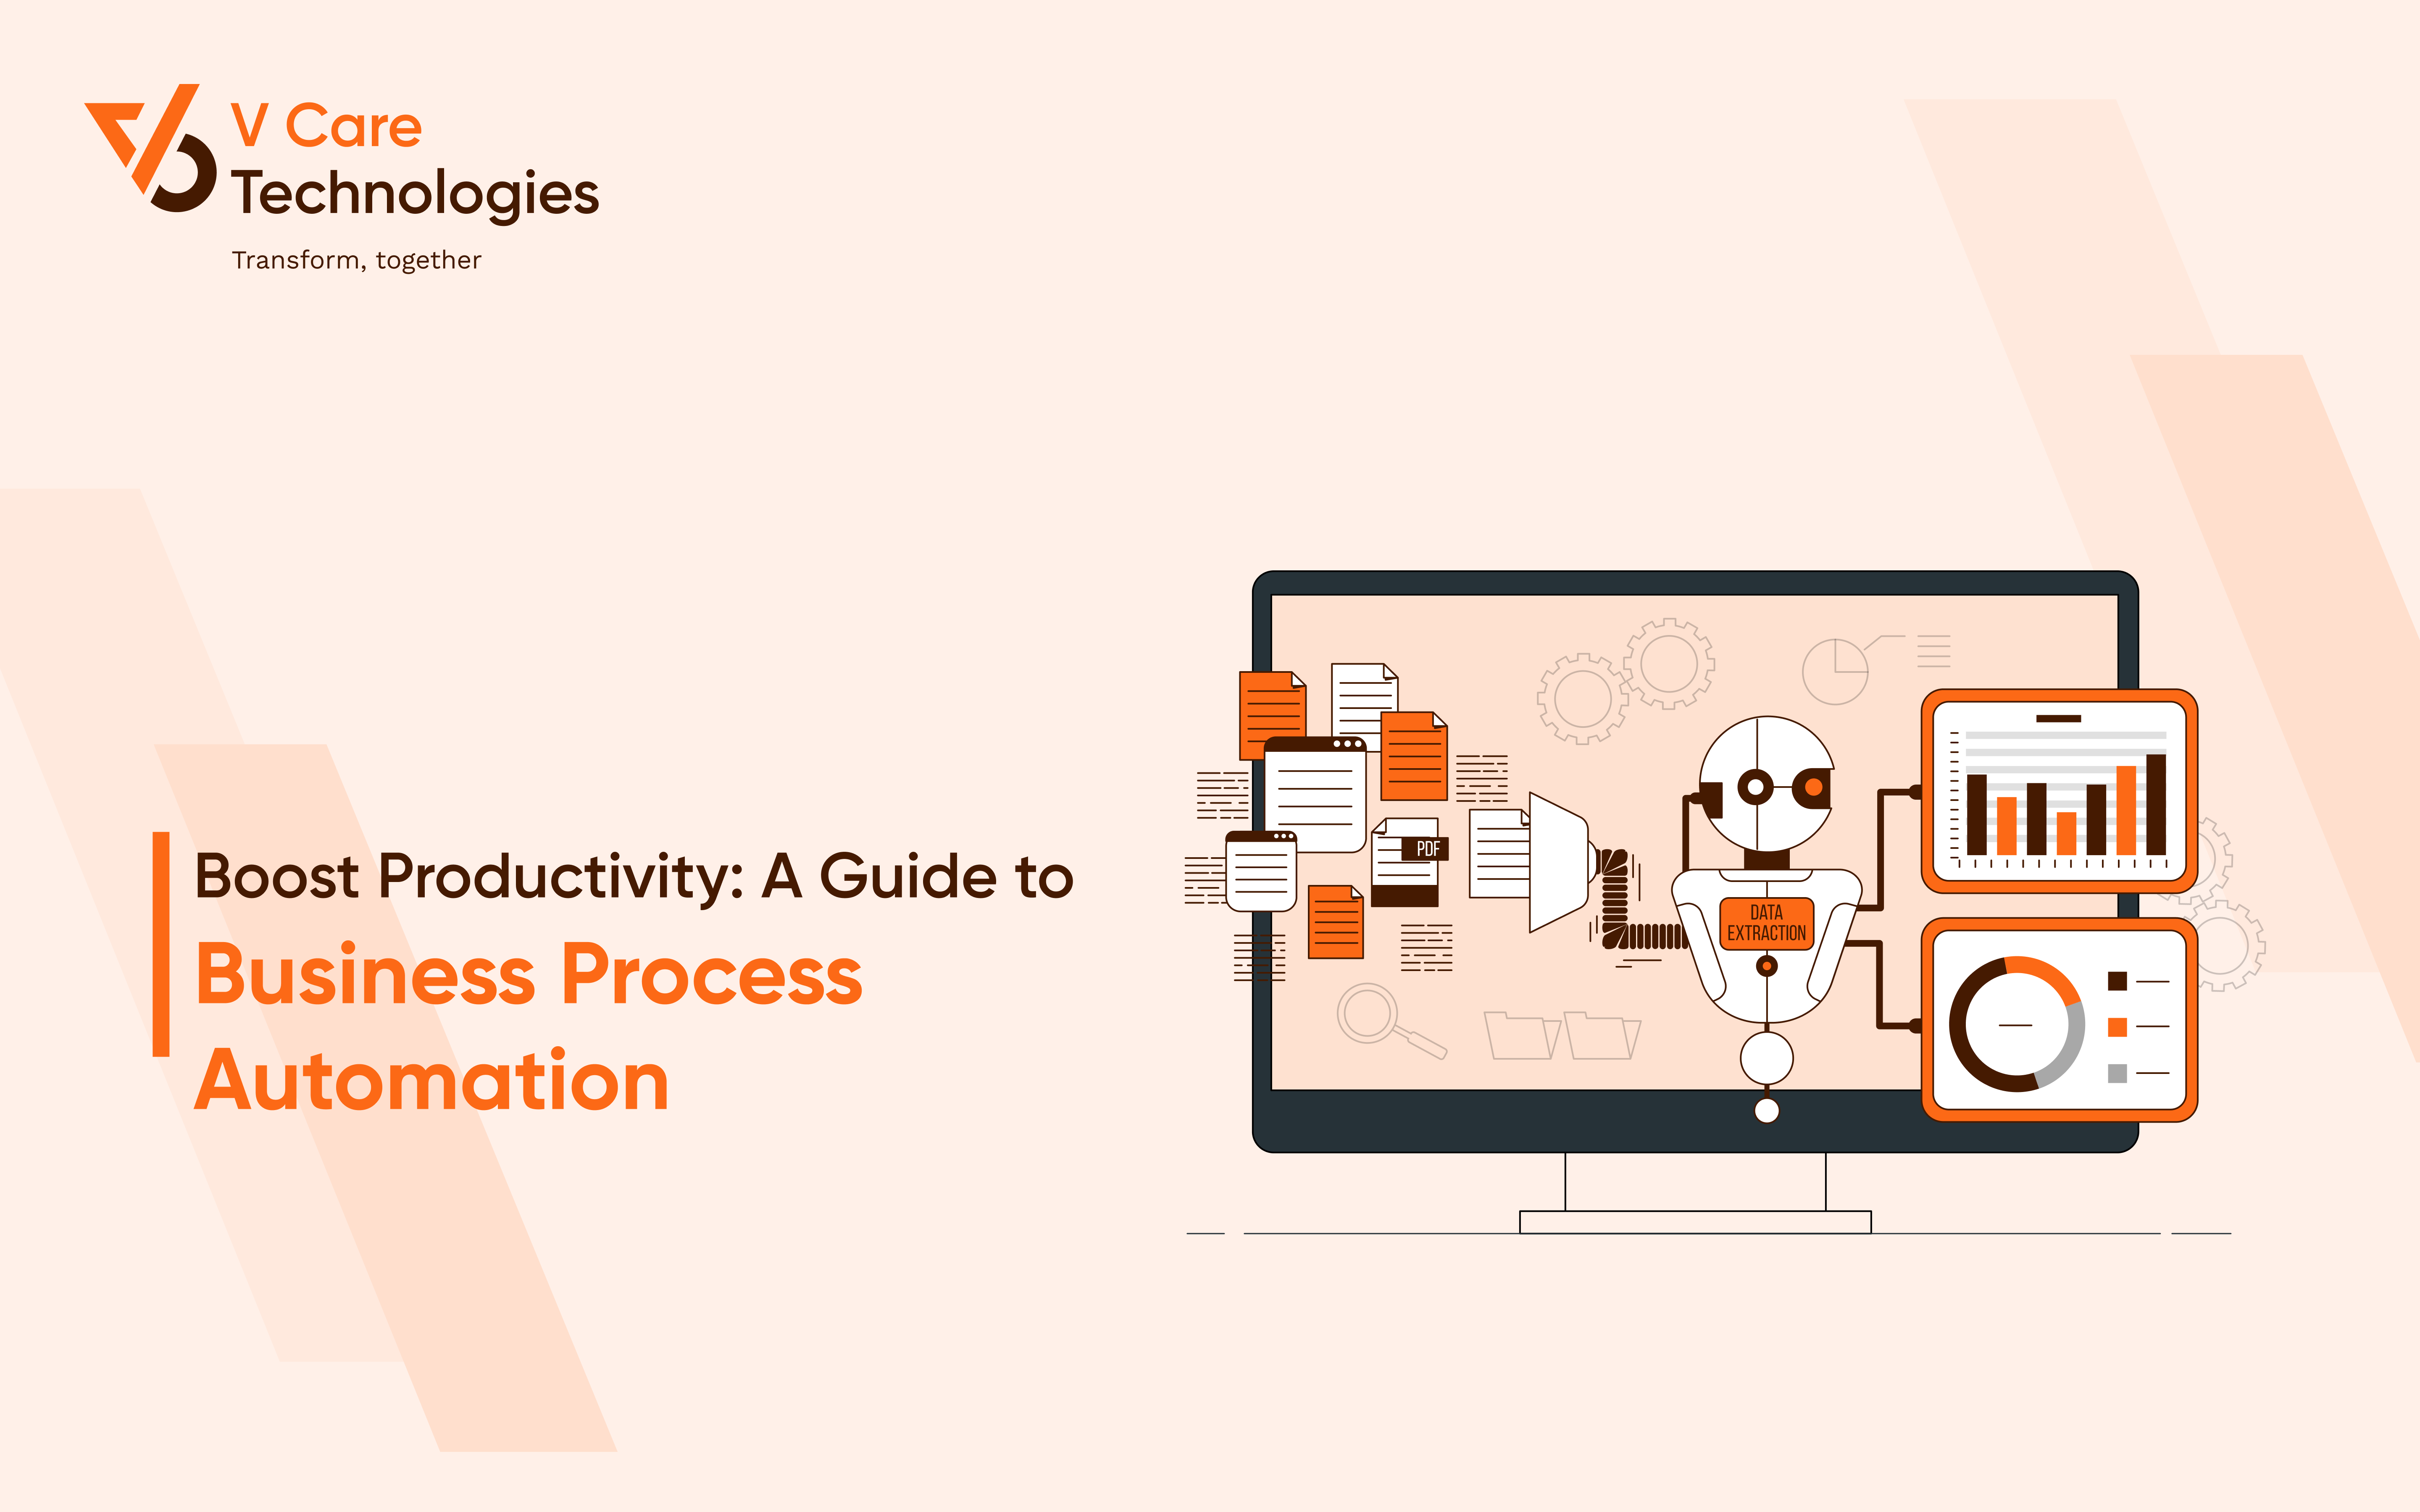 Boost Productivity: A Guide to Business Process Automation